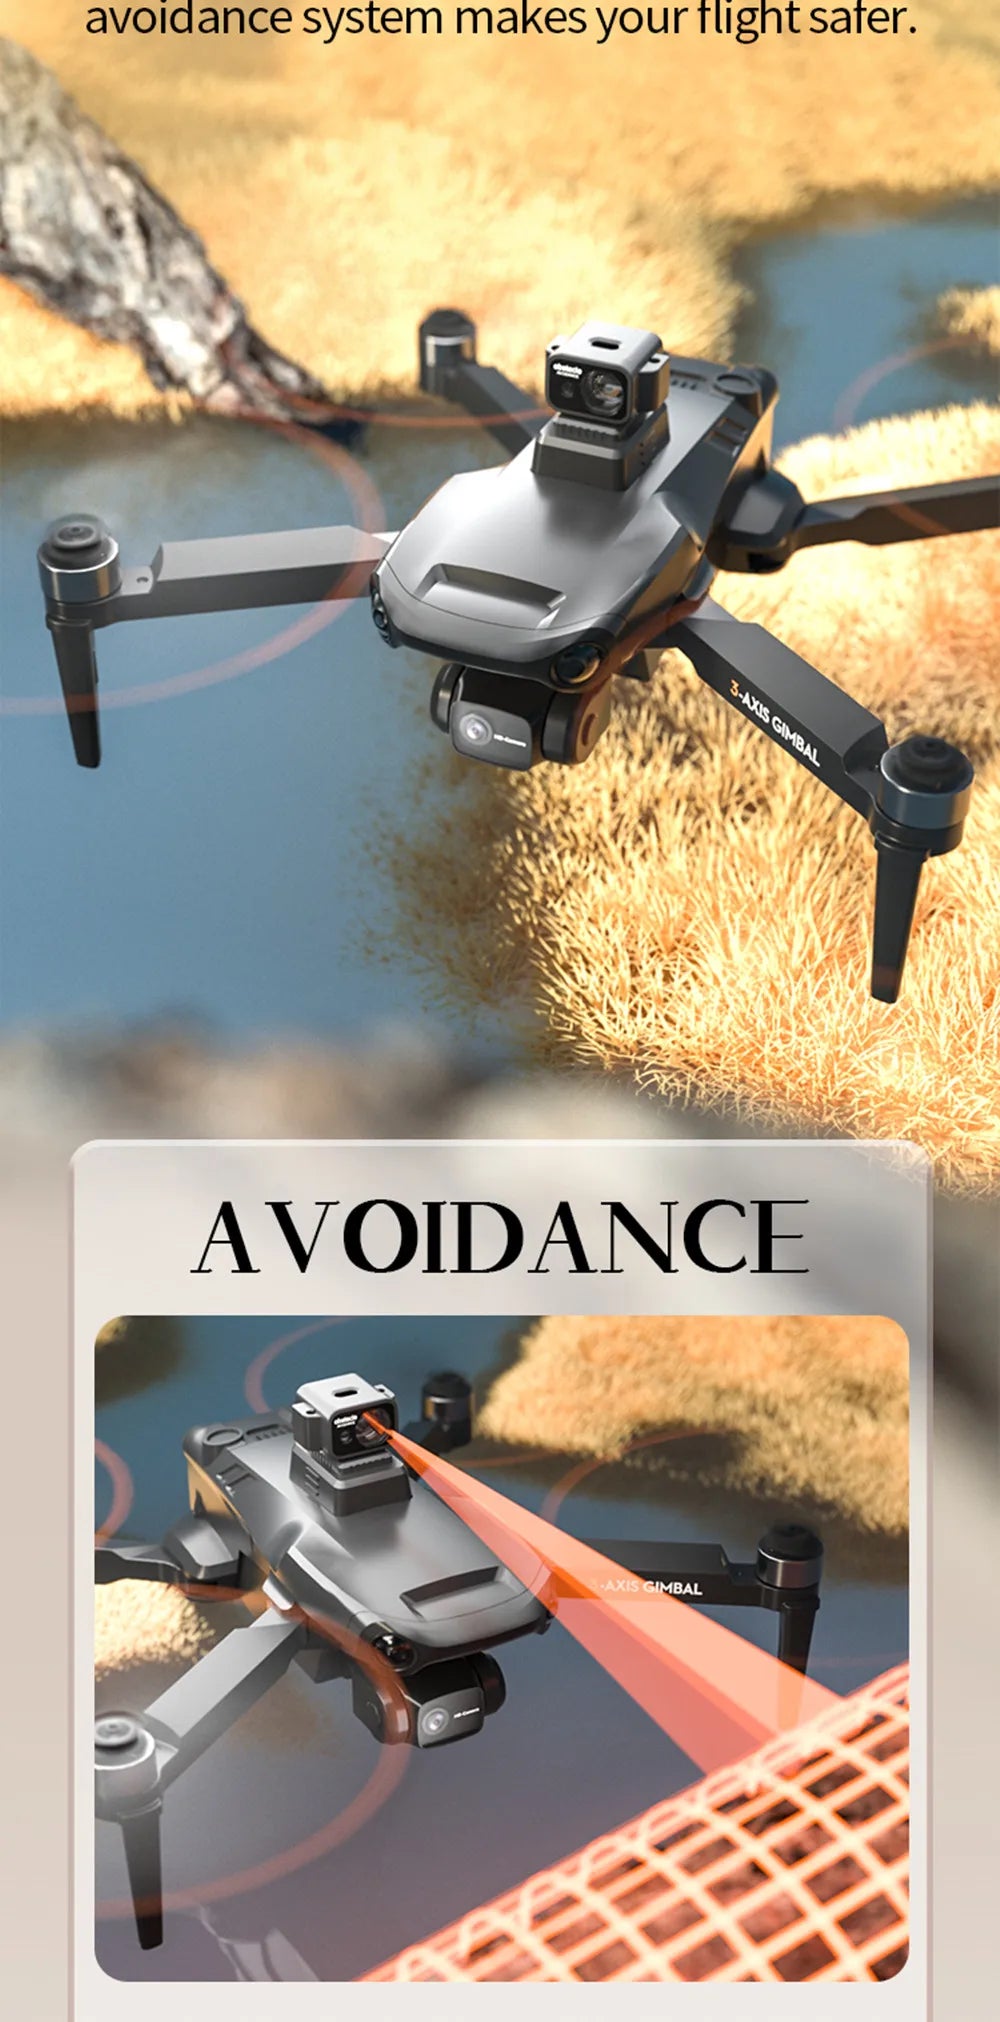 X38 PRO Drone, avoidance system makes your flight sater. uns GIMBAL Ase